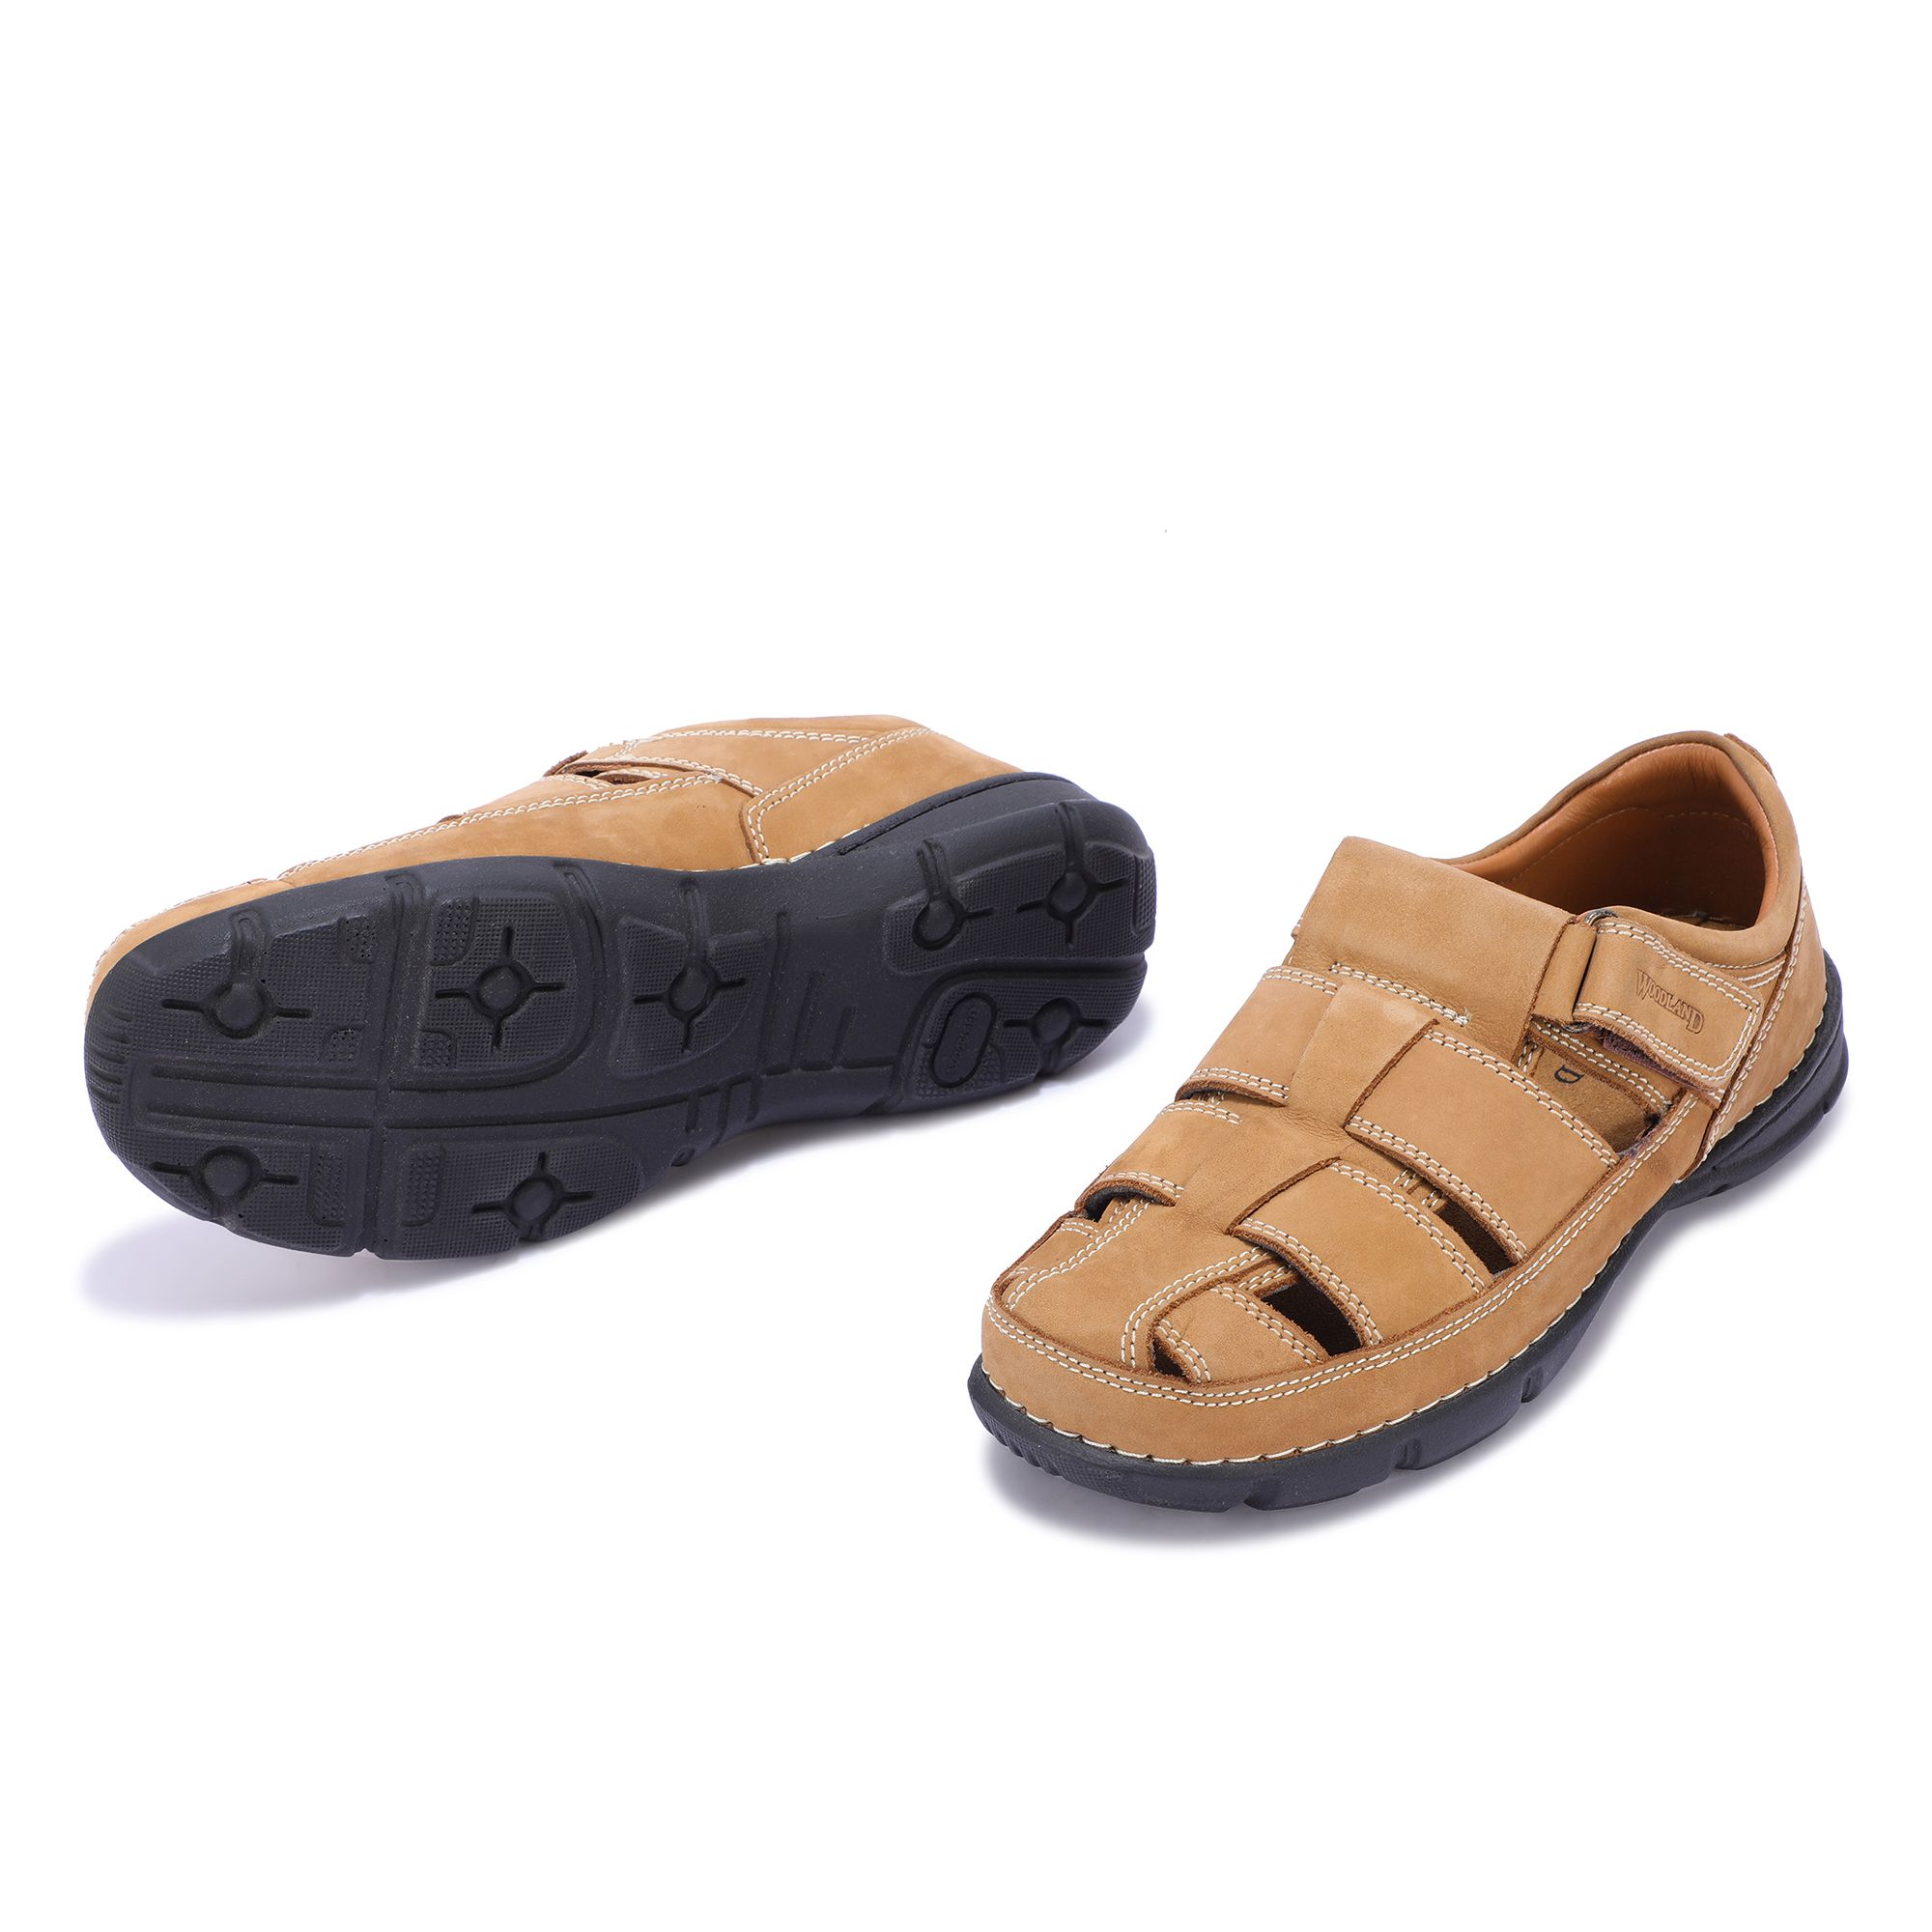 Buy Bora 6127 Open footwear Online at Best Price in India – Urban Country